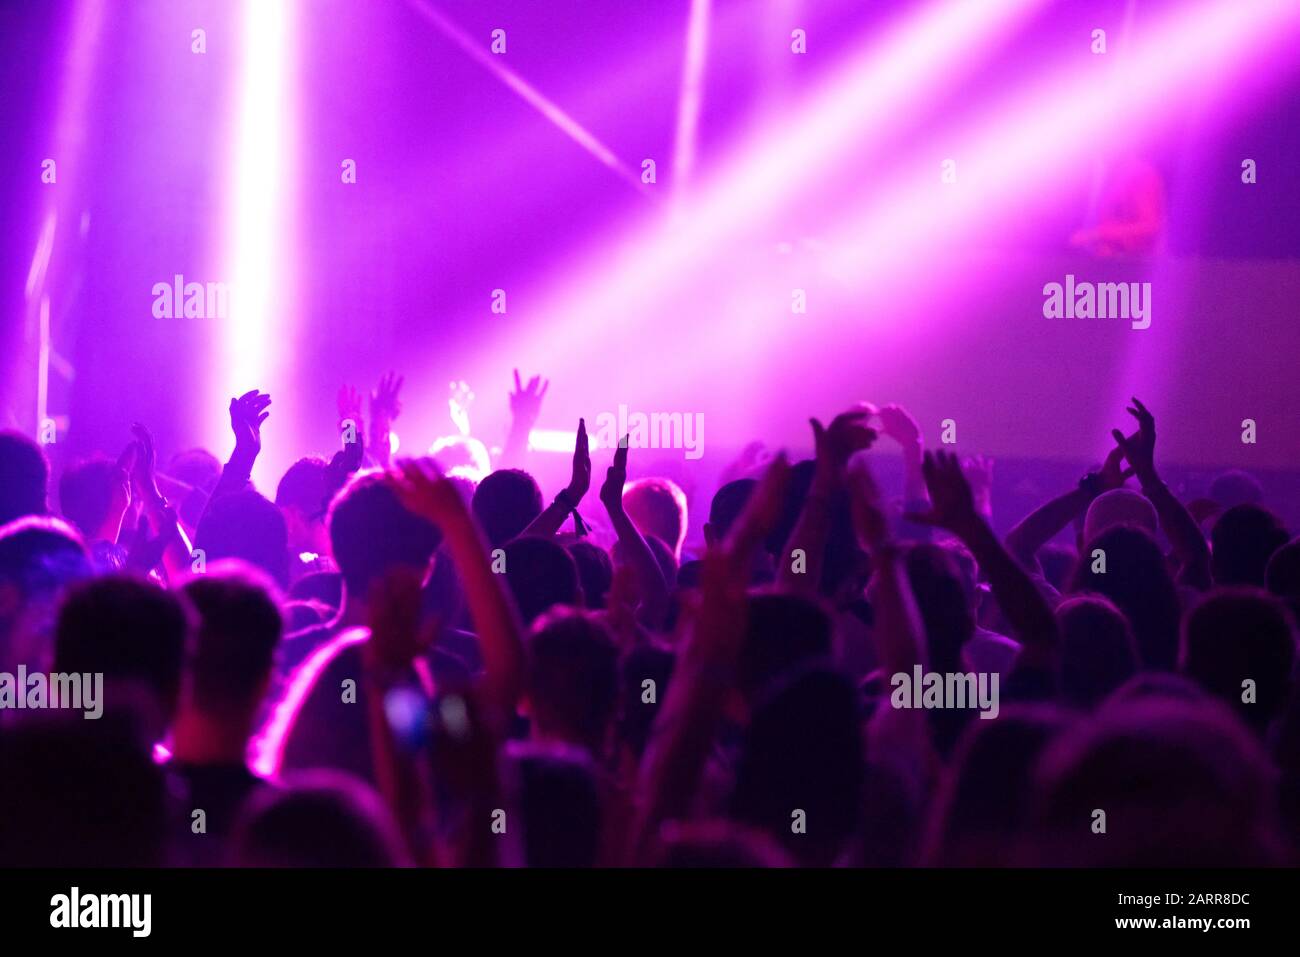 Blurred image of silhouette of raised arms, crowd of people in the front of bright stage lights at popular music concert Stock Photo